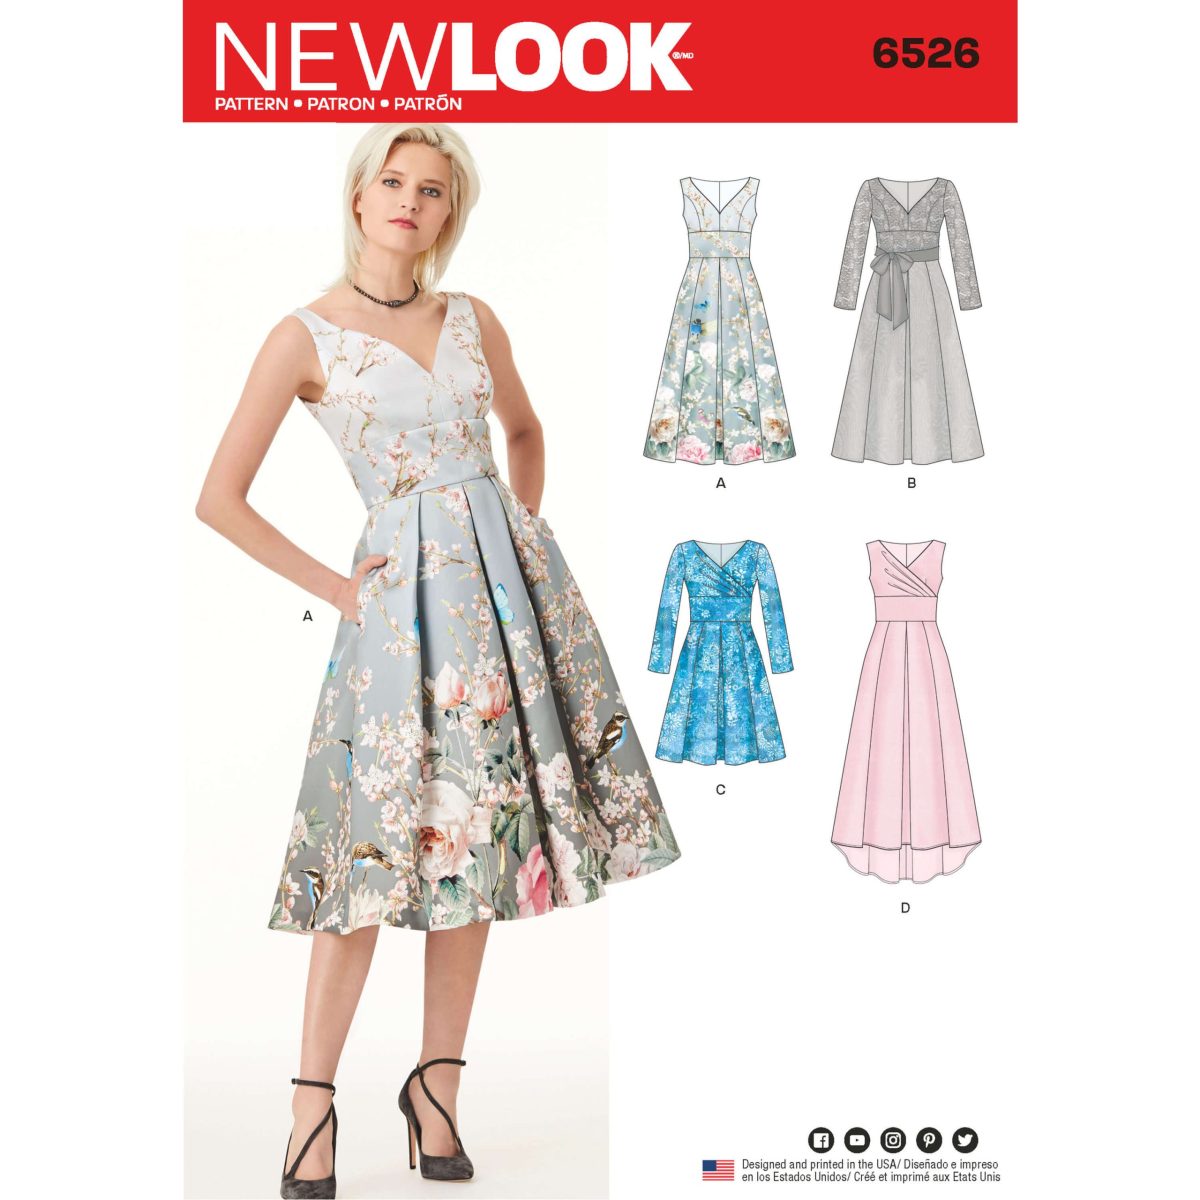 New Look Pattern 6526 Misses’ Dress With Bodice Variations - Sewdirect